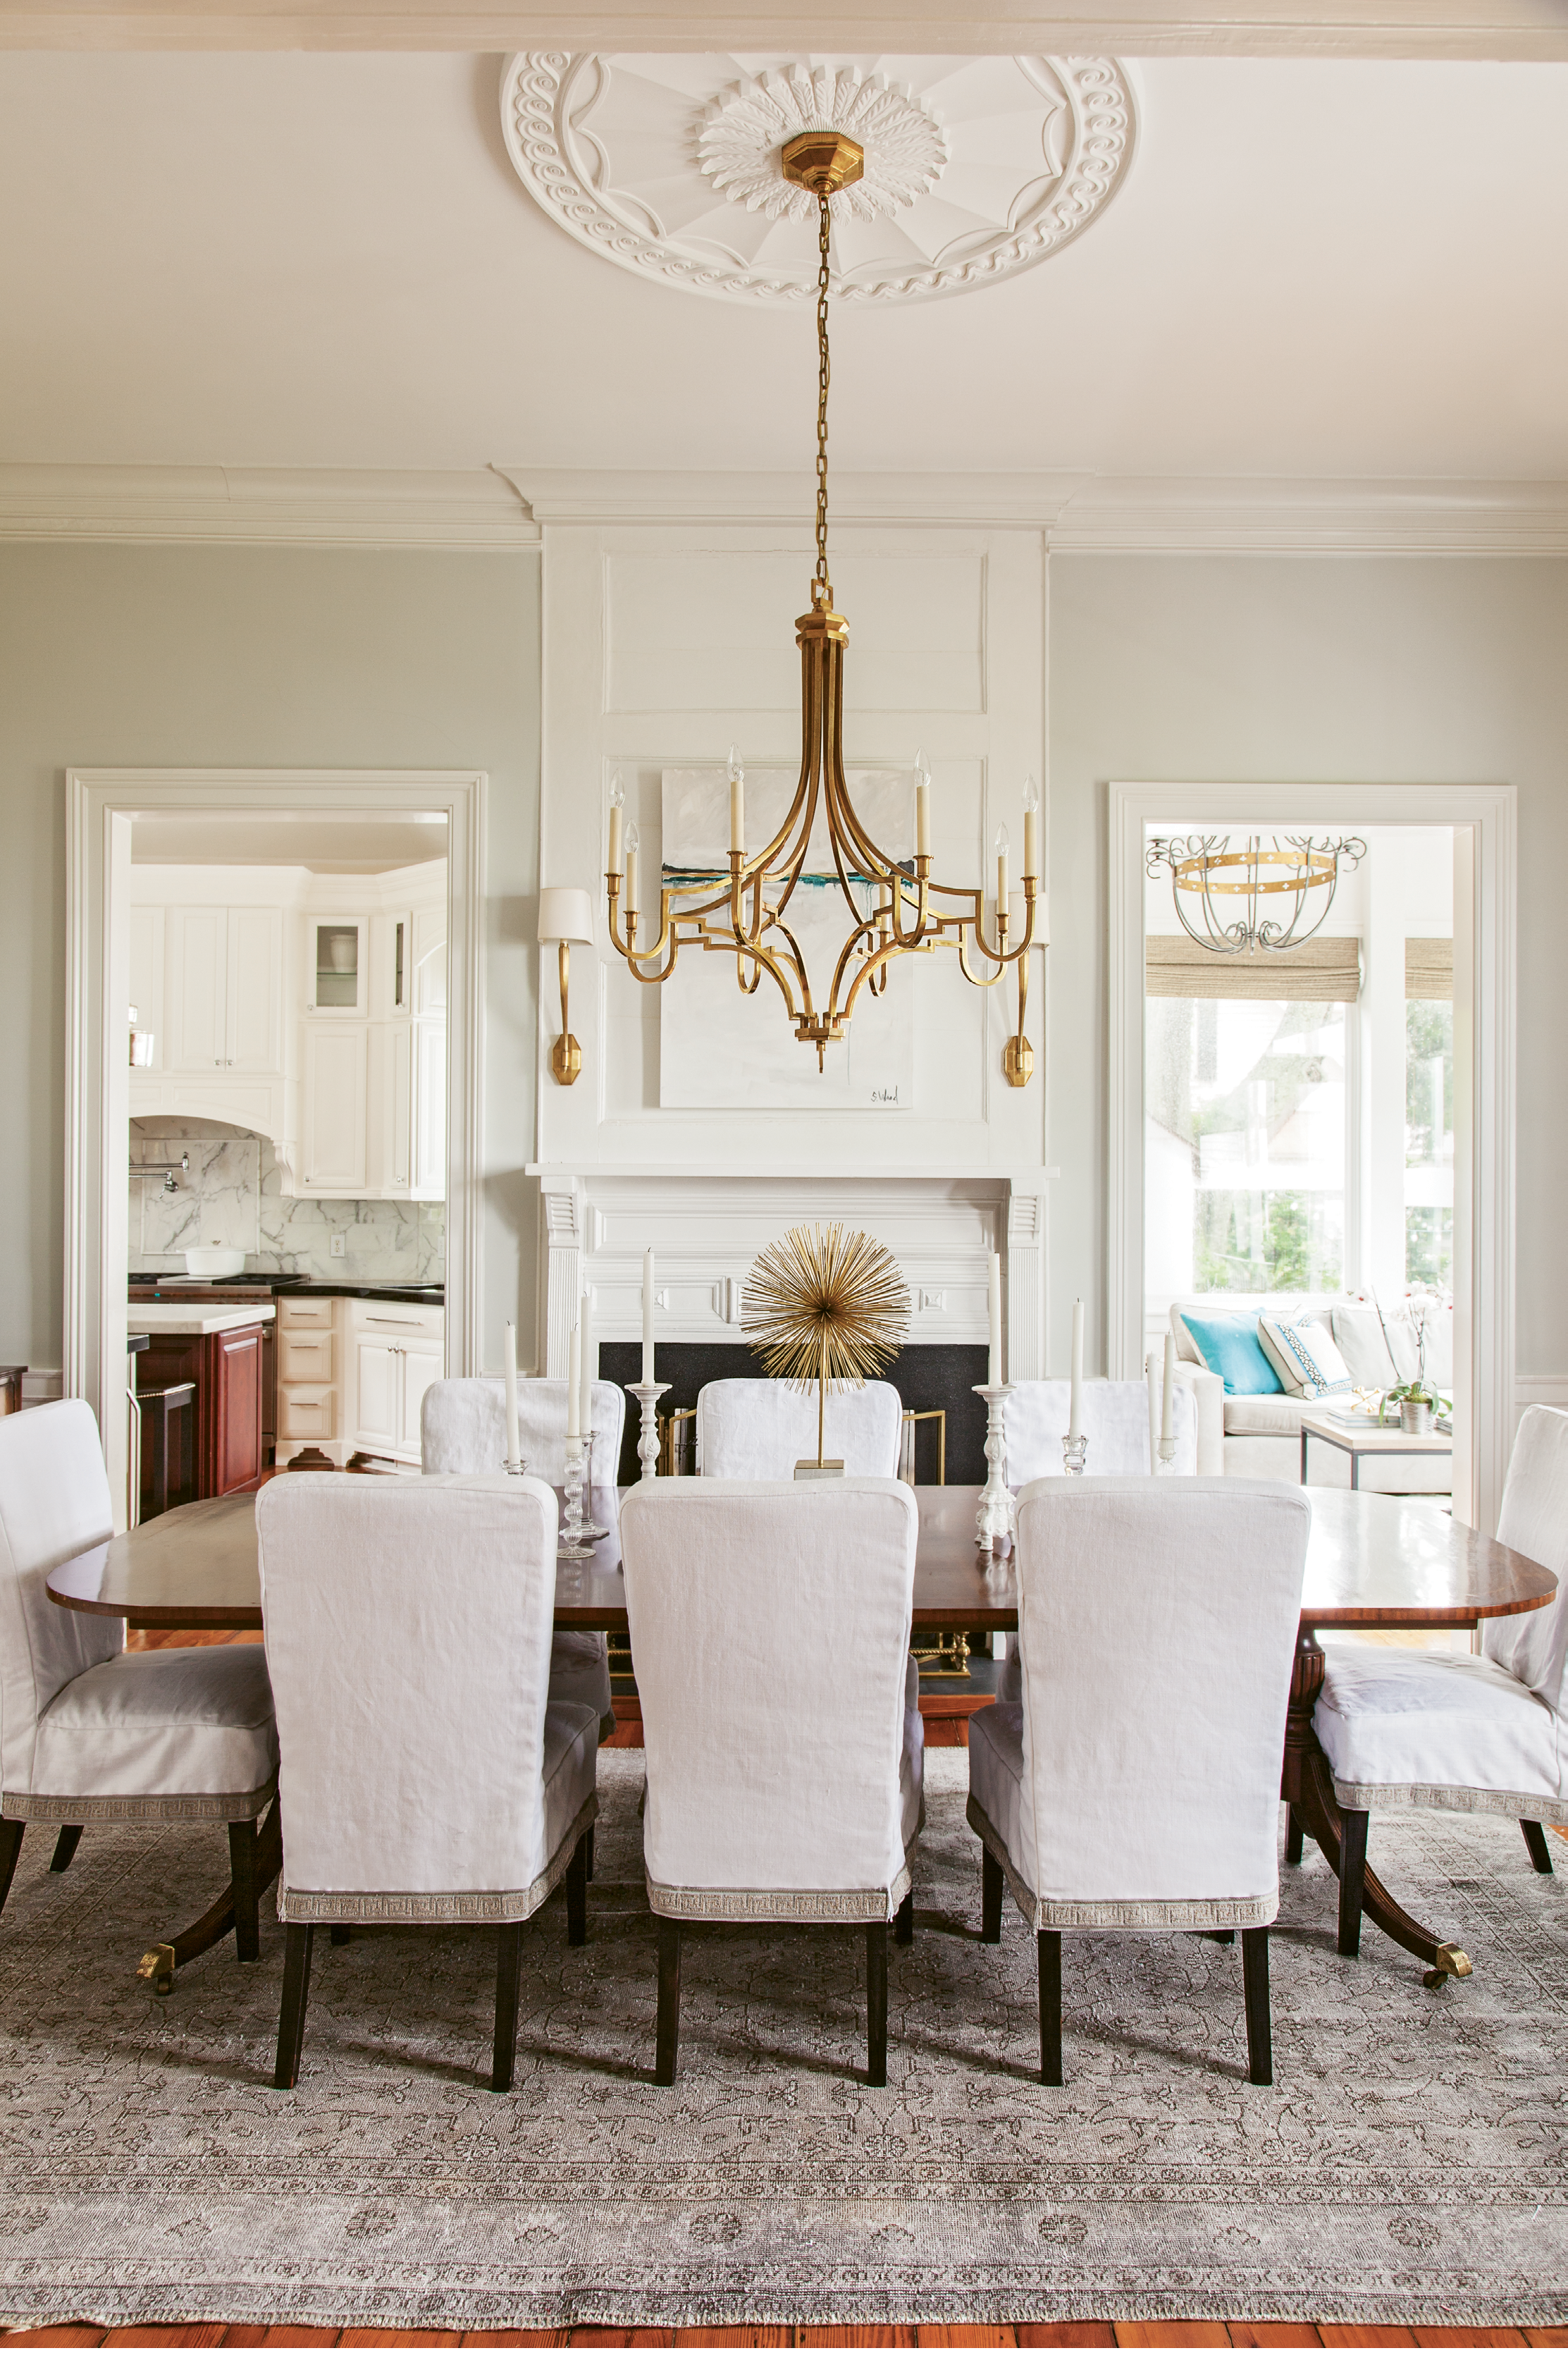 With the help of interior designer Amee Leland, the homeowners replaced numerous heavy and dated crystal chandeliers with sculptural modern selections more suited to the couple’s casually sophisticated aesthetic.